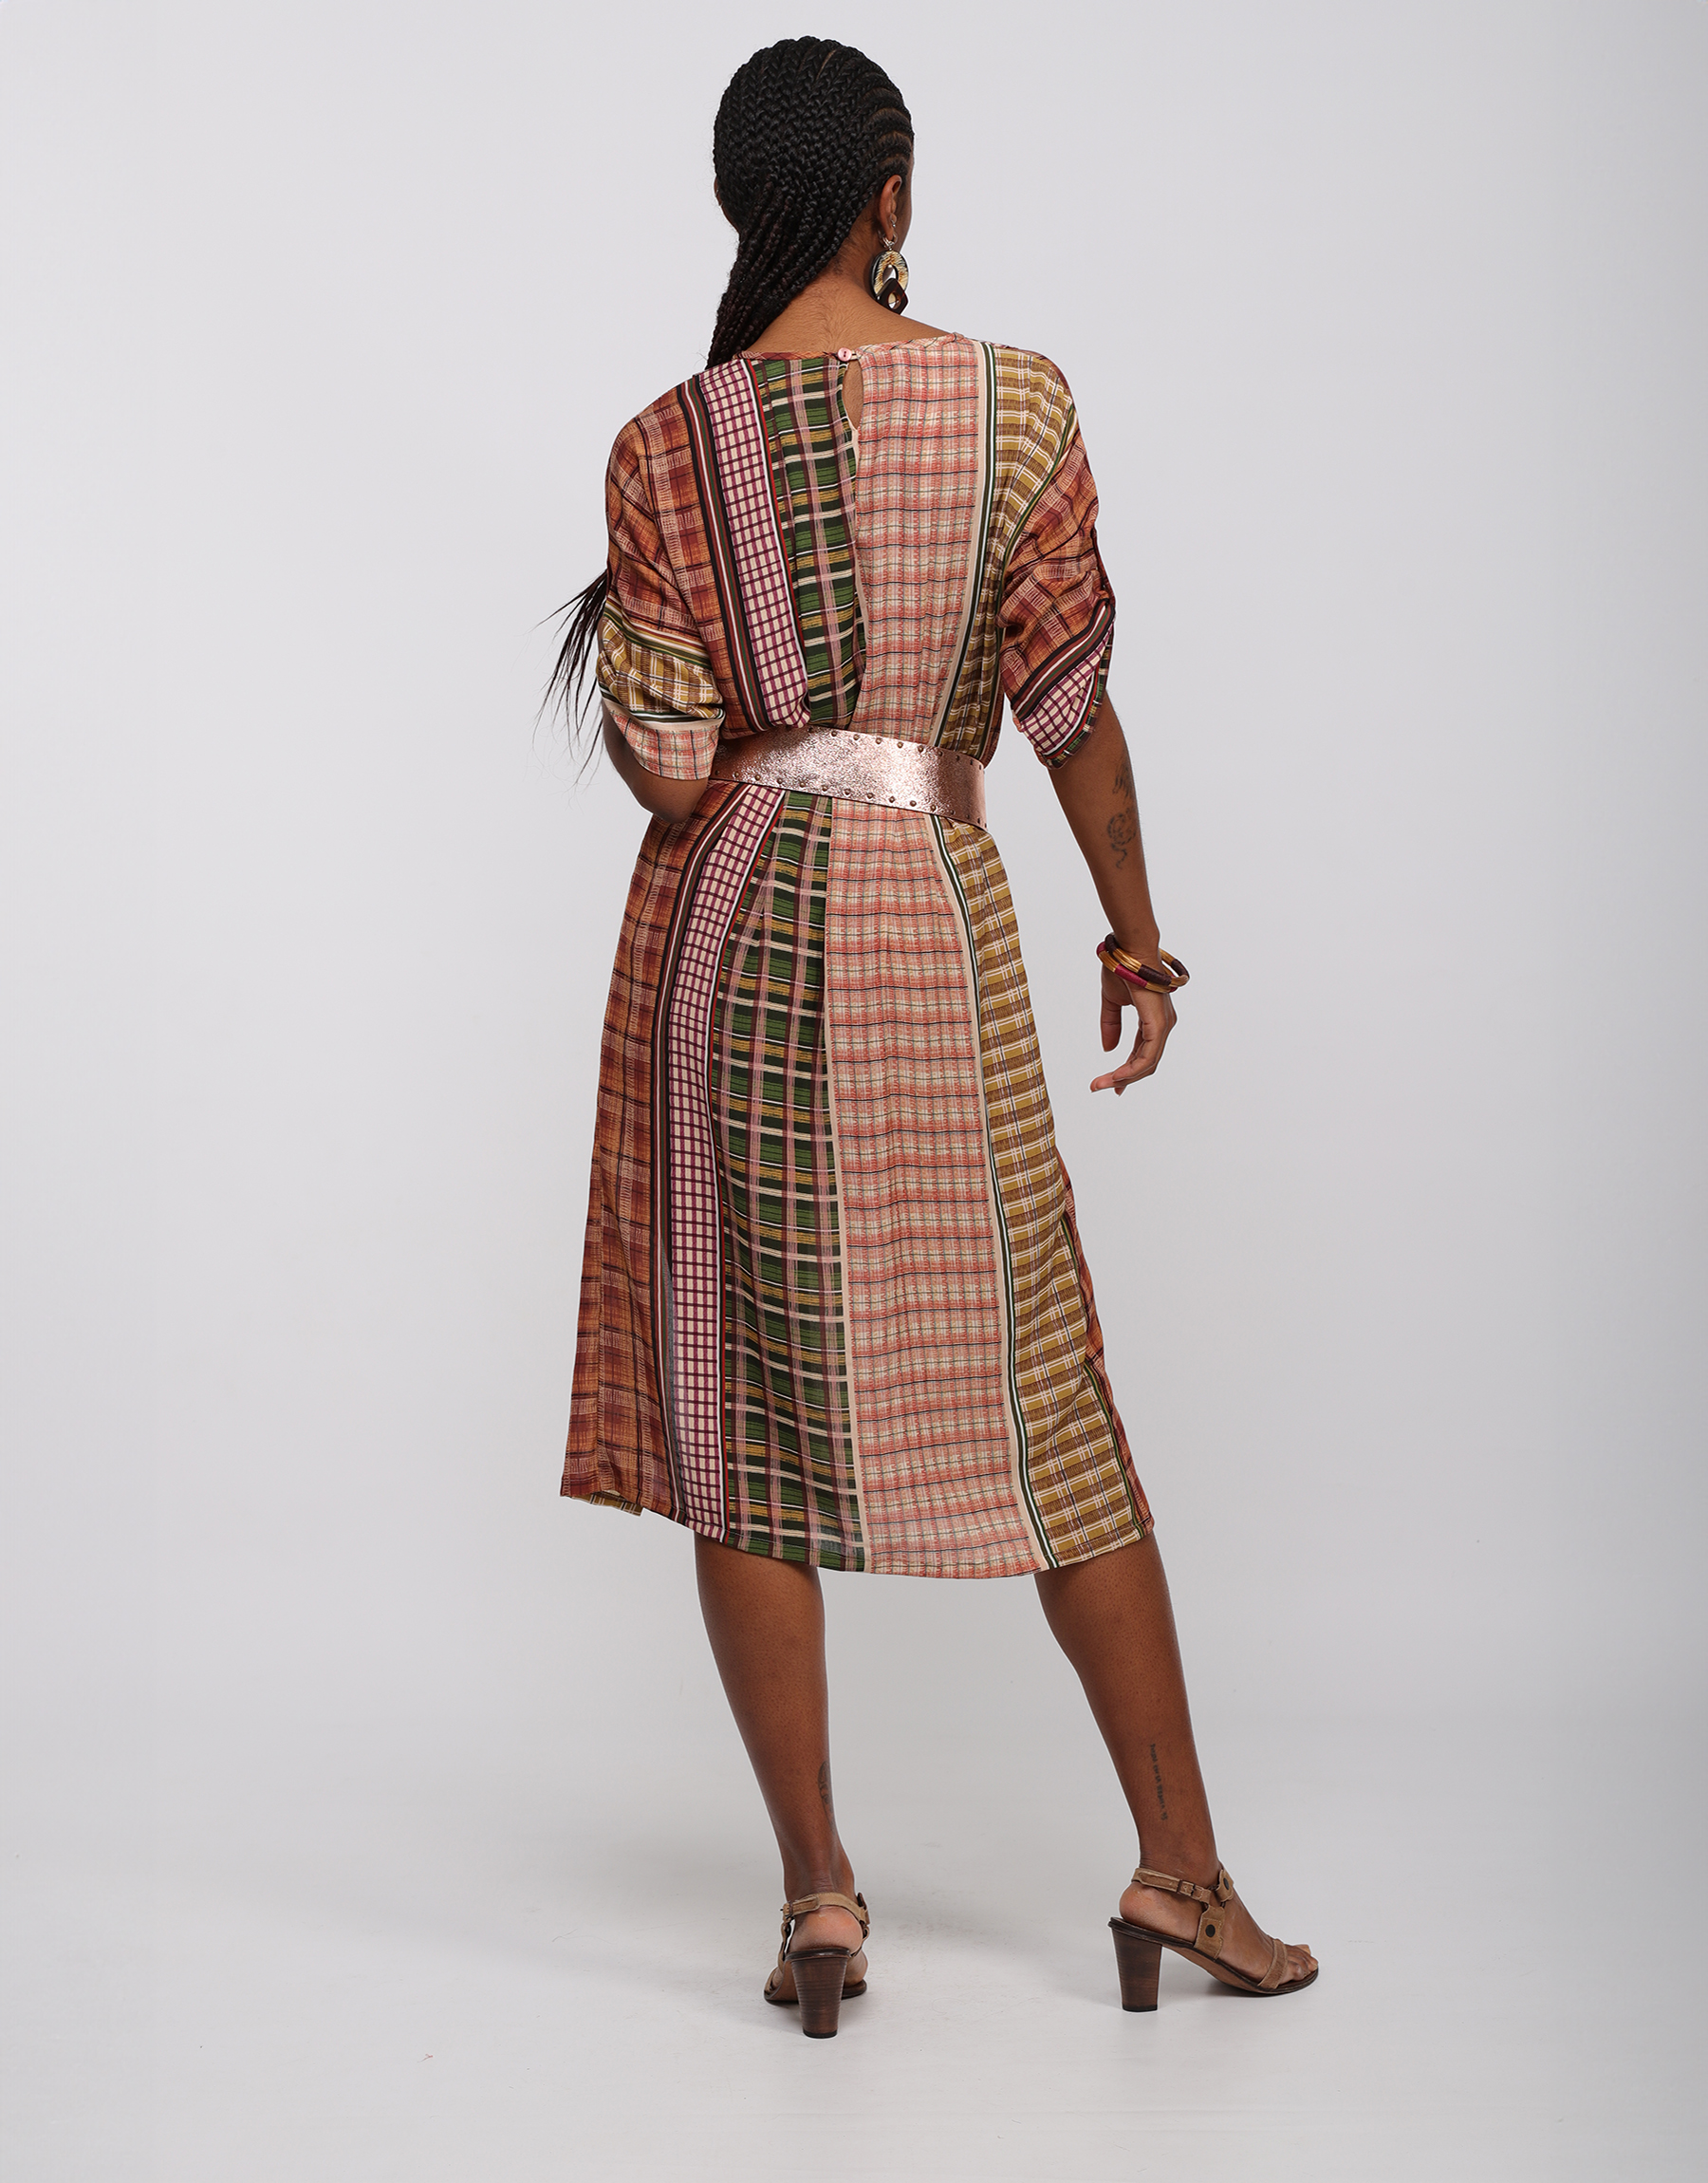 Flowing straight dress in patchwork madras printed viscose in spice tones